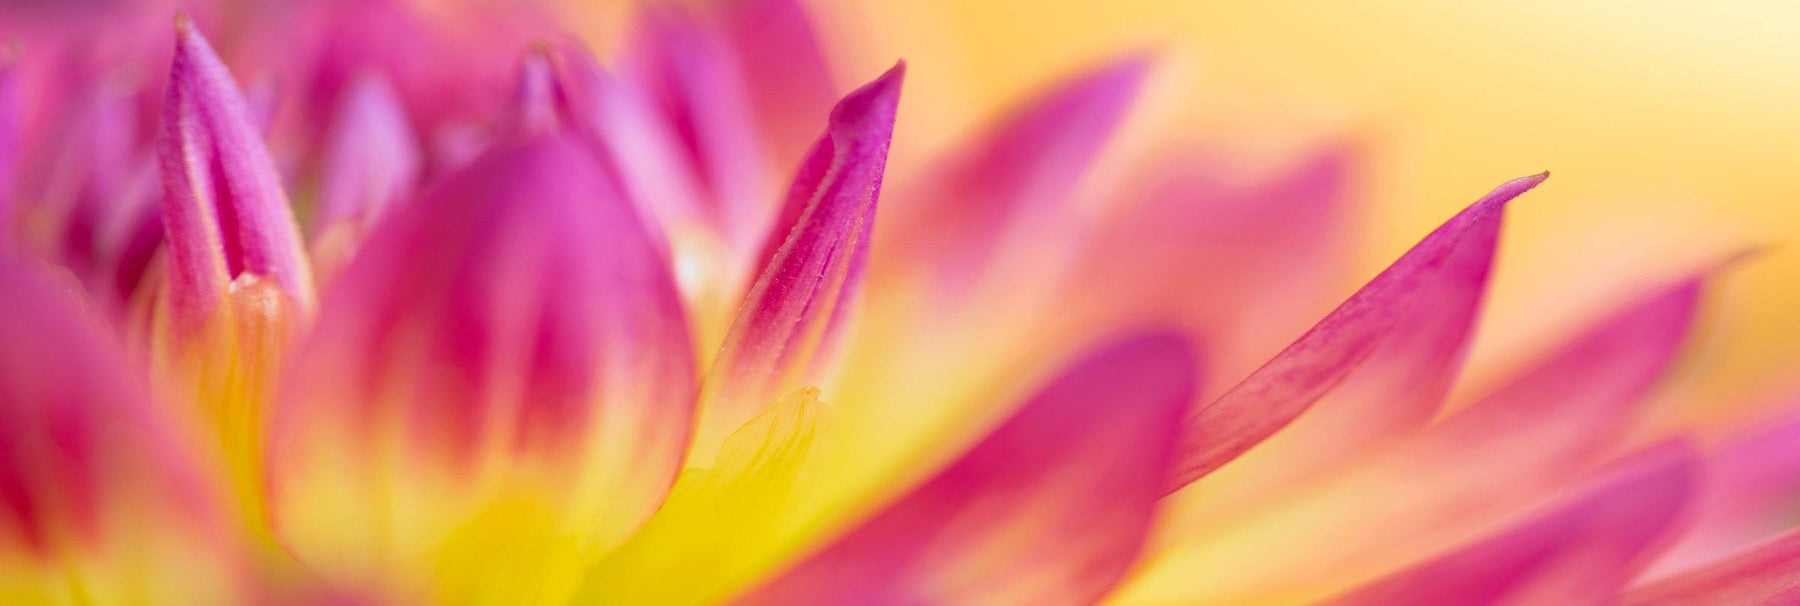 Close up of the pink and yellow petals of a spring flower